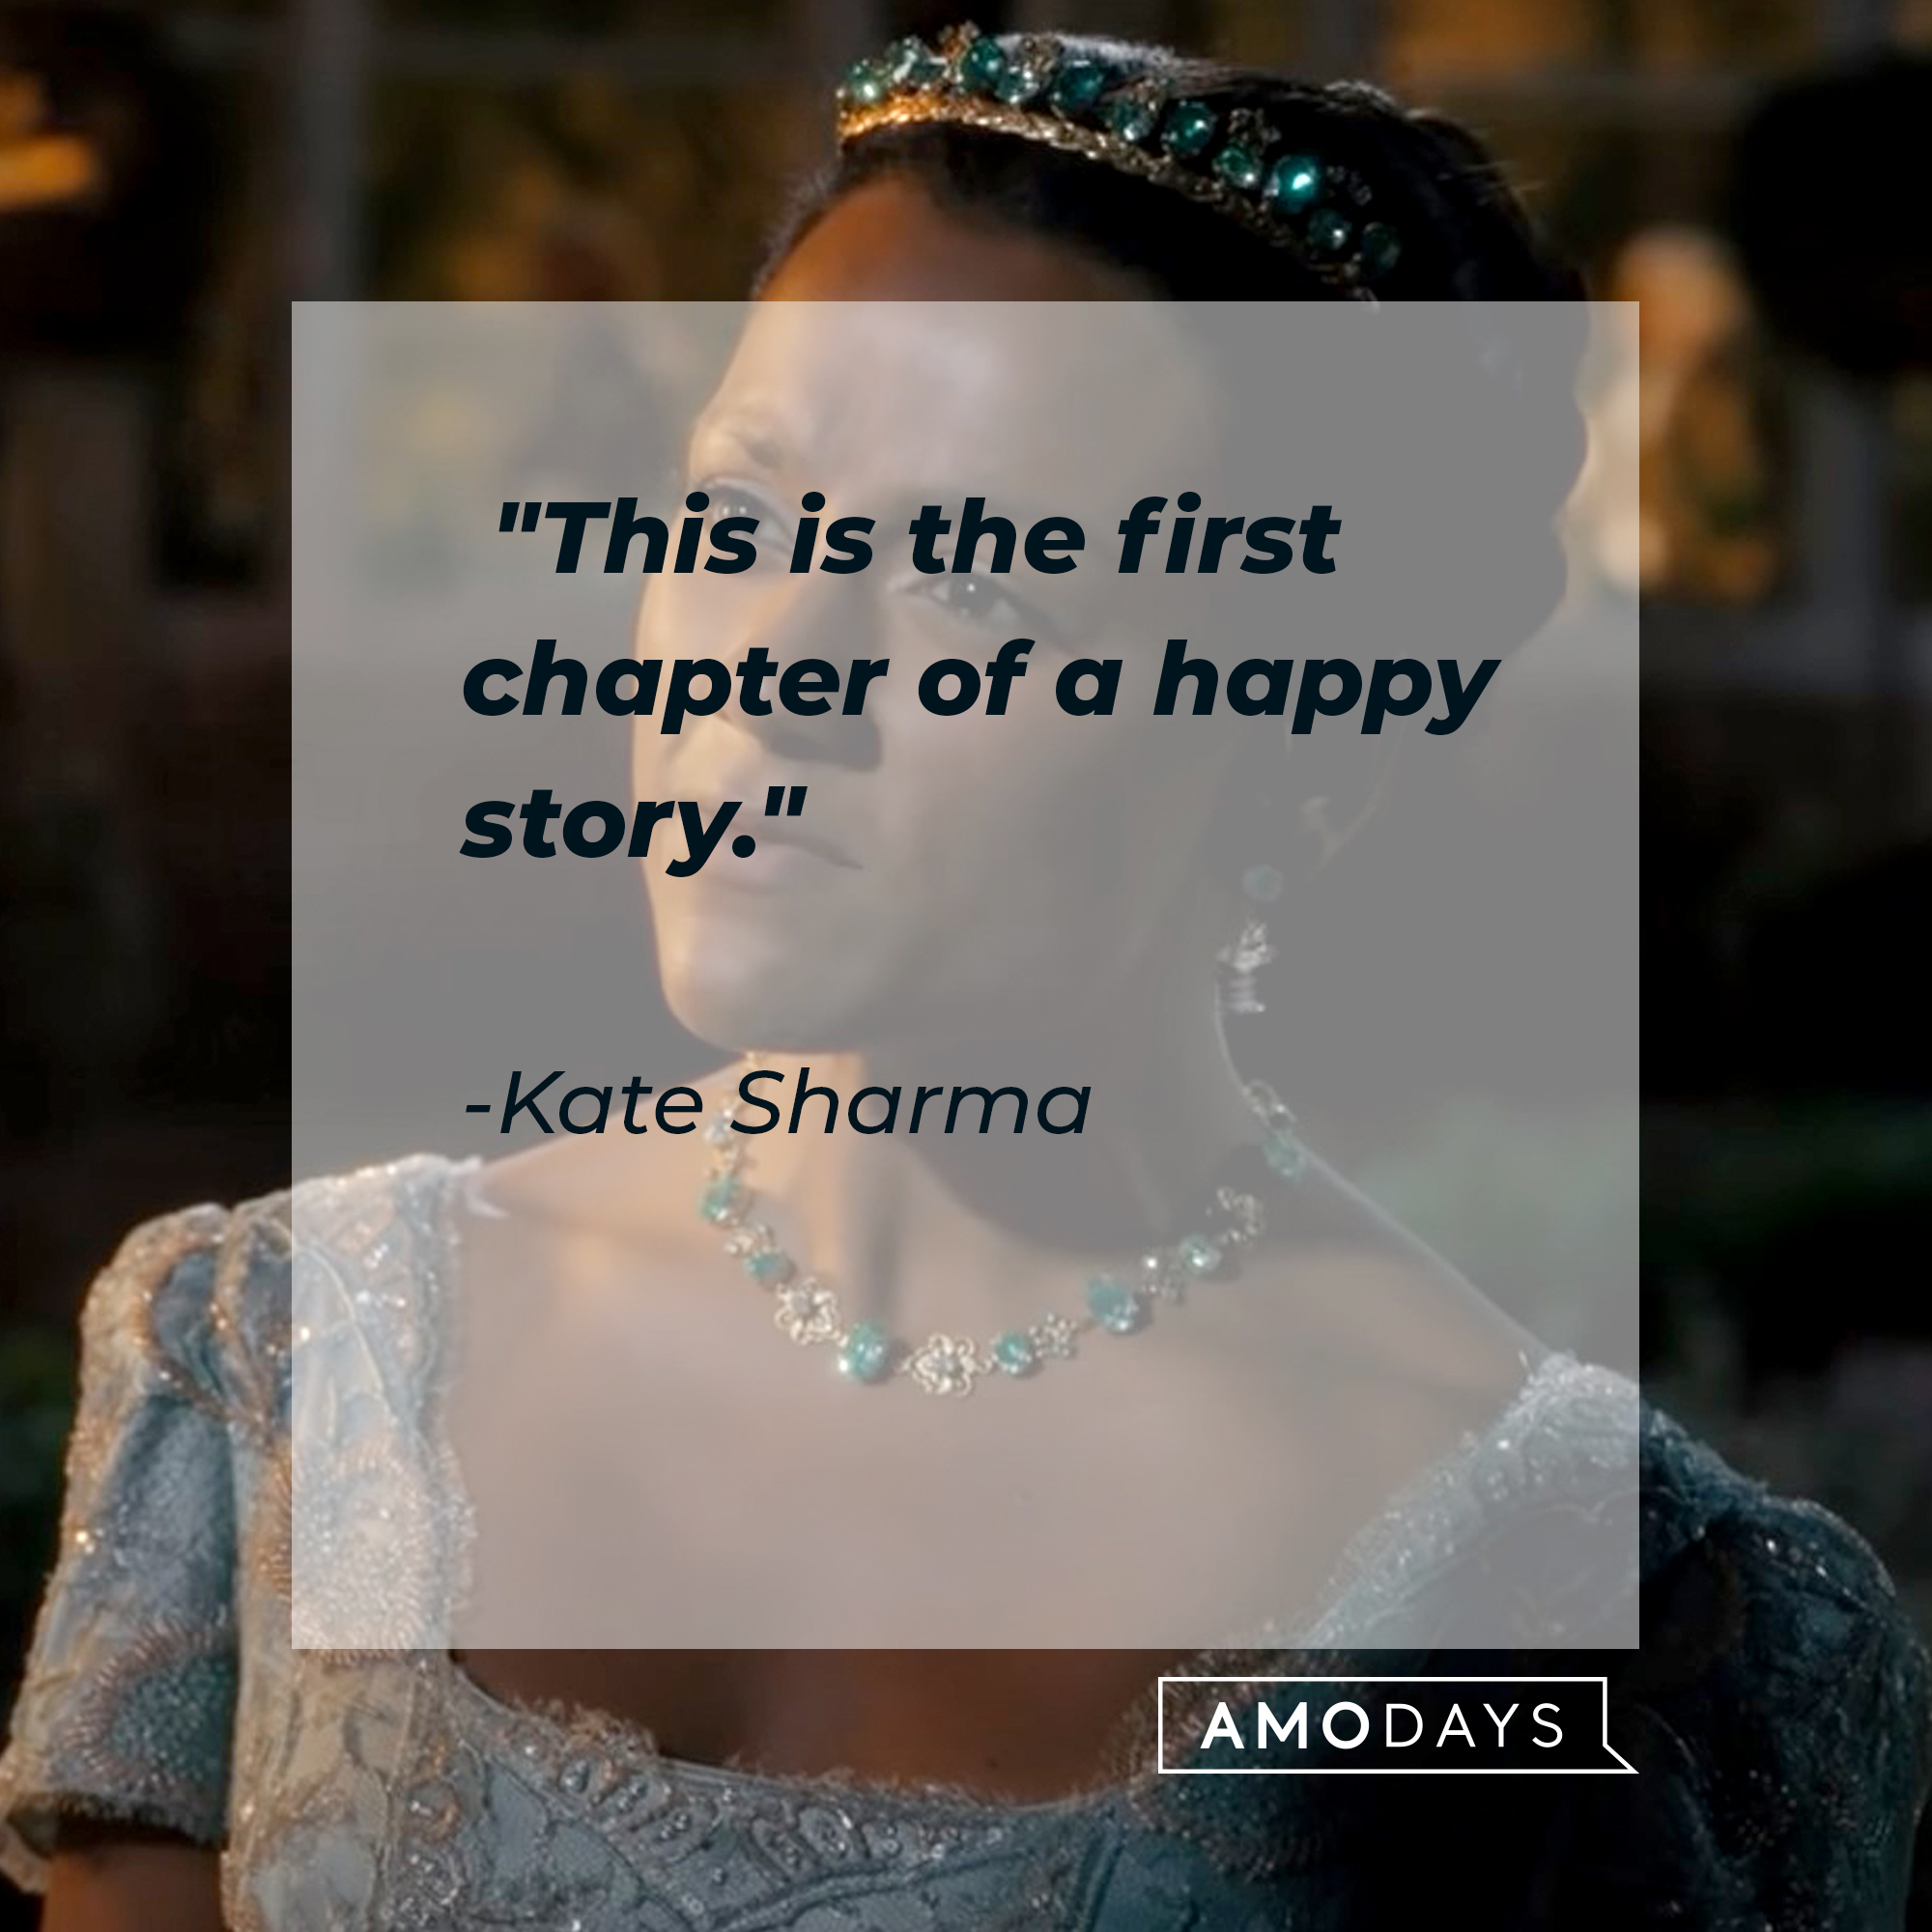 A character from Bridgerton with Kate Sharma’s quote: "This is the first chapter of a happy story." │ youtube.com/Netflix